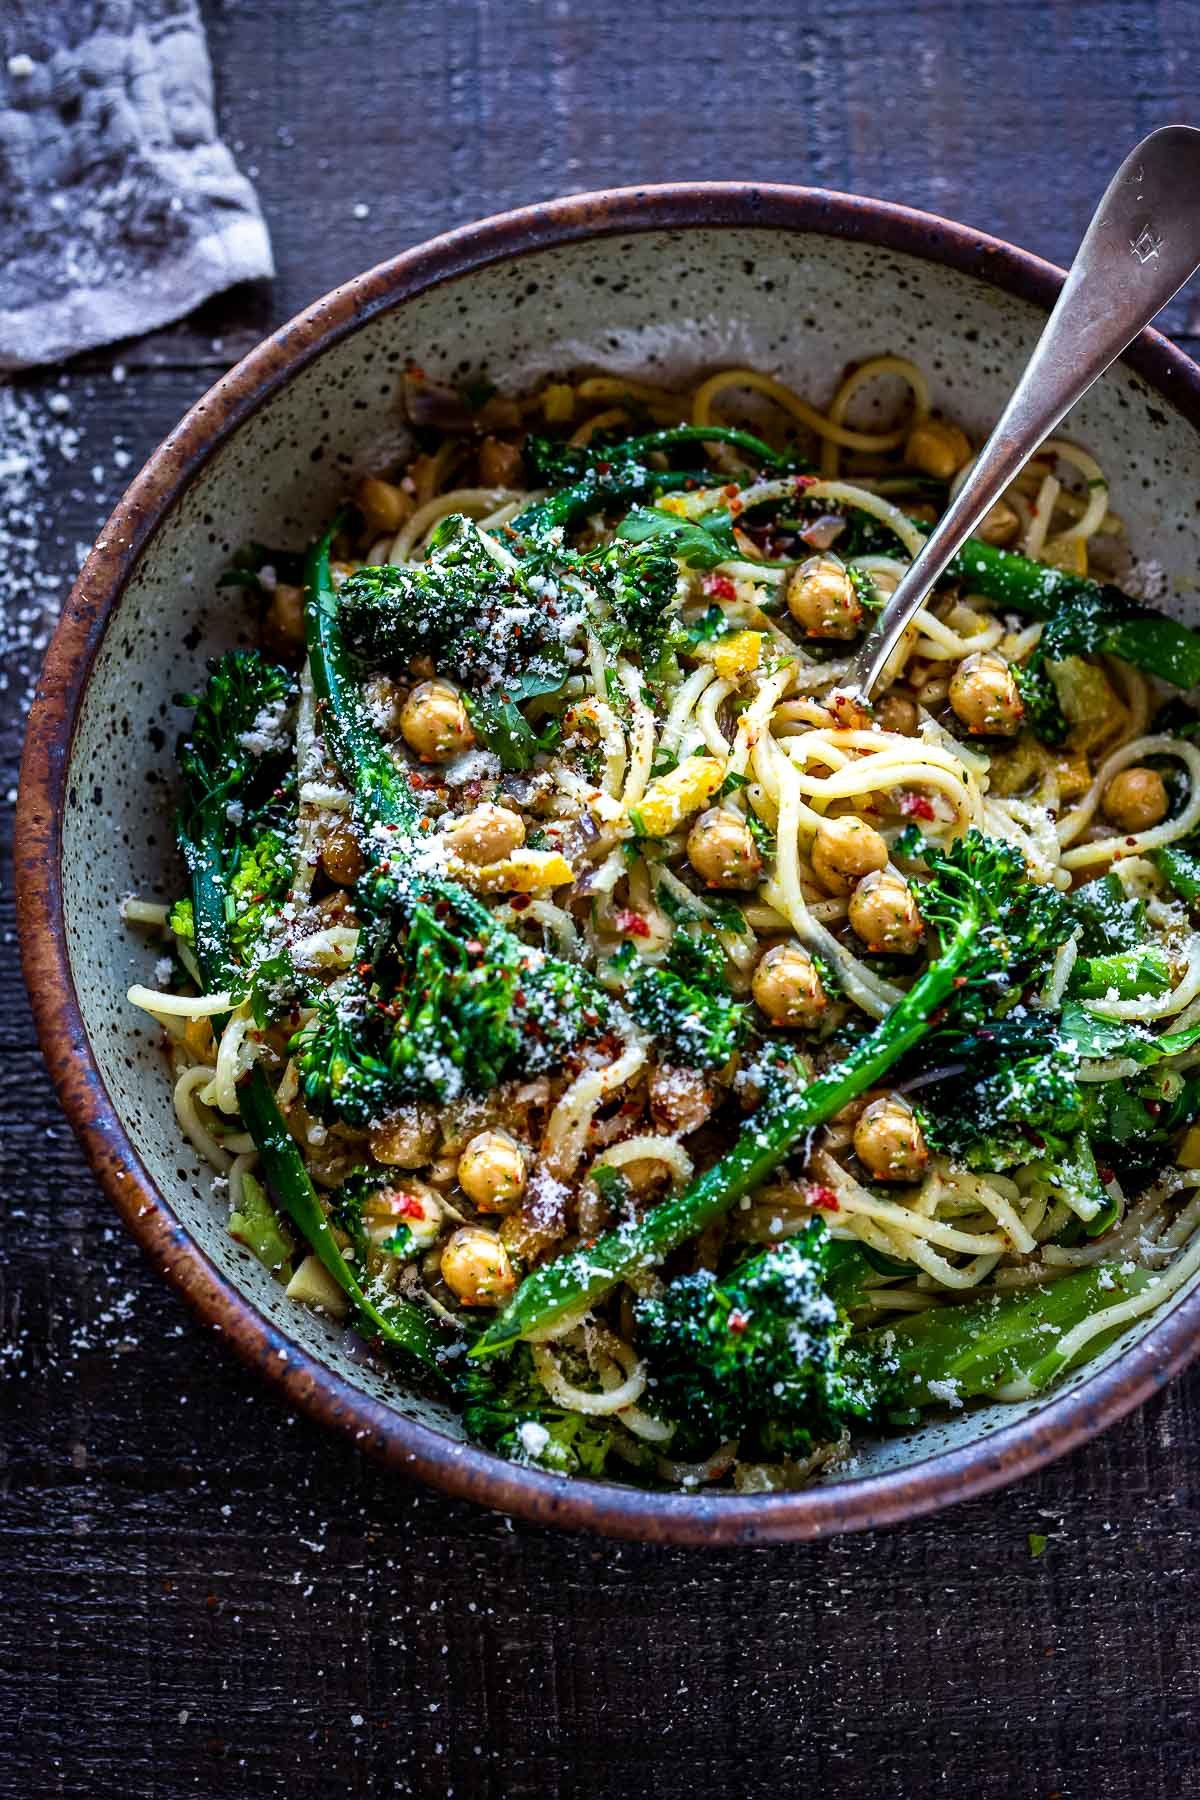 This simple Pasta with Broccolini, Preserved Lemon and Chickpeas is punchy and bright and comes together quickly and easily - on the table in under 30 minutes!  A tasty healthy weeknight dinner! #spaghetti #broccolipasta #broccolini